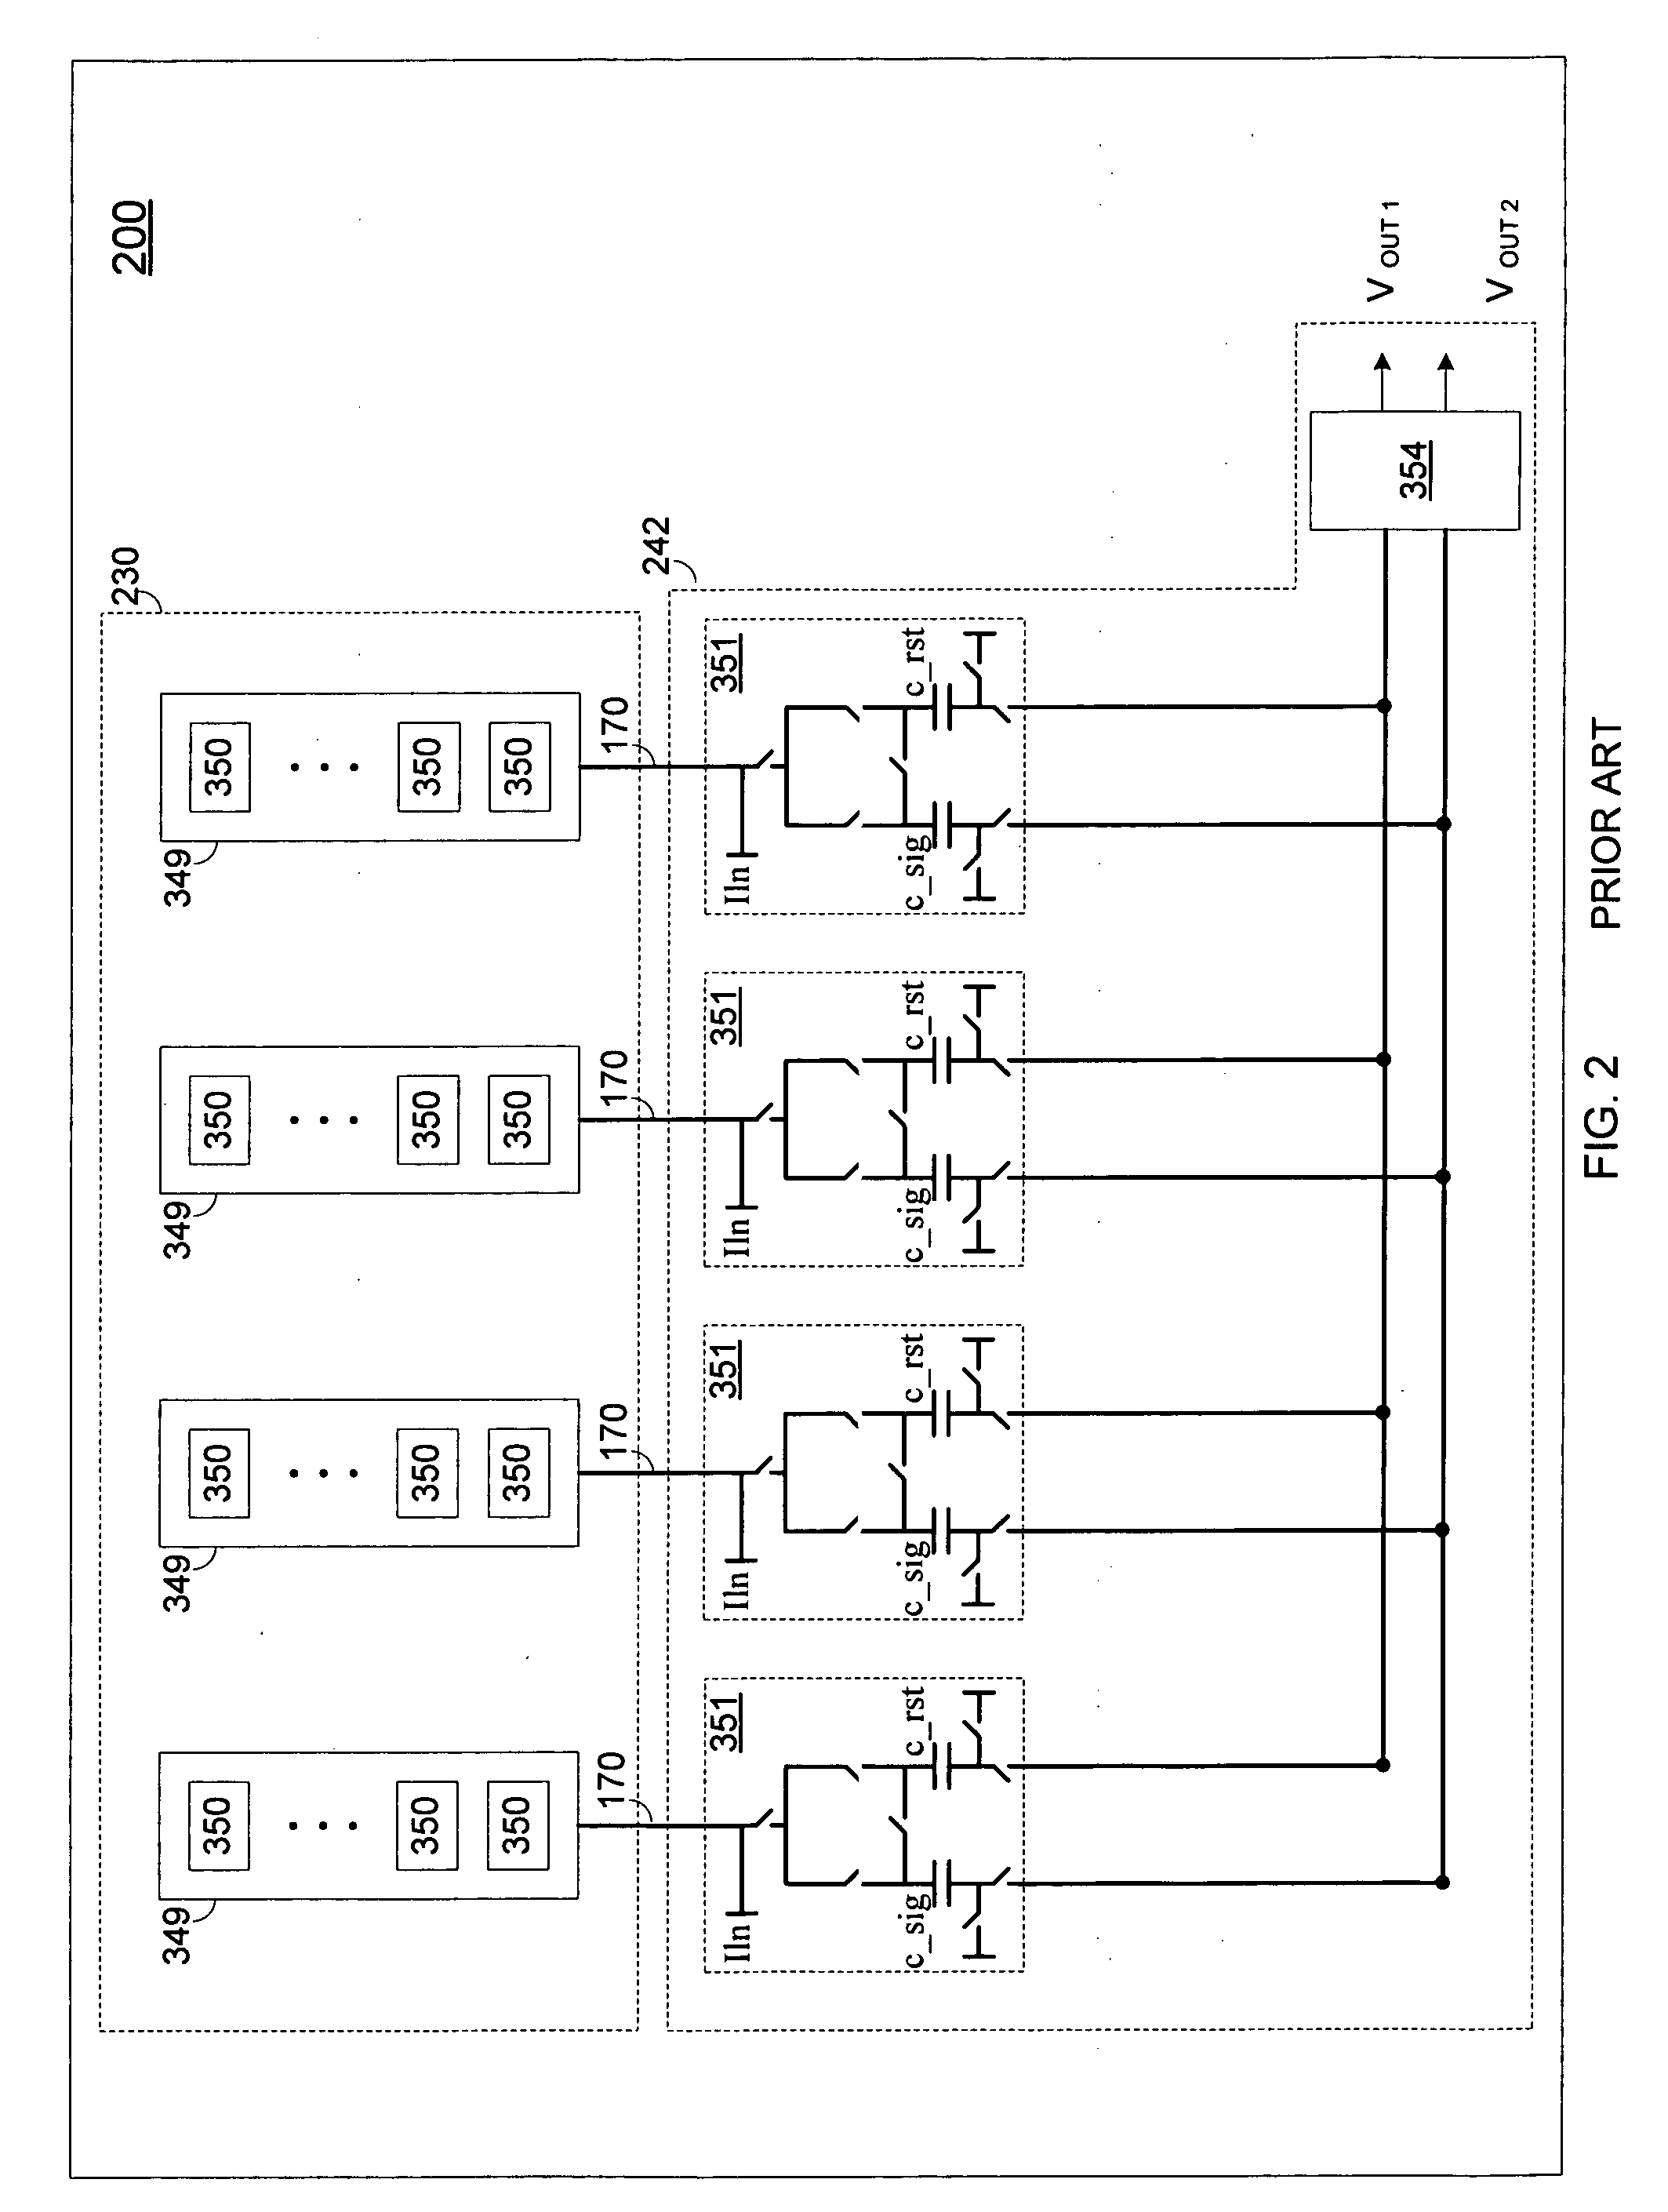 Method and apparatus employing dynamic element matching for reduction of column-wise fixed pattern noise in a solid state imaging sensor